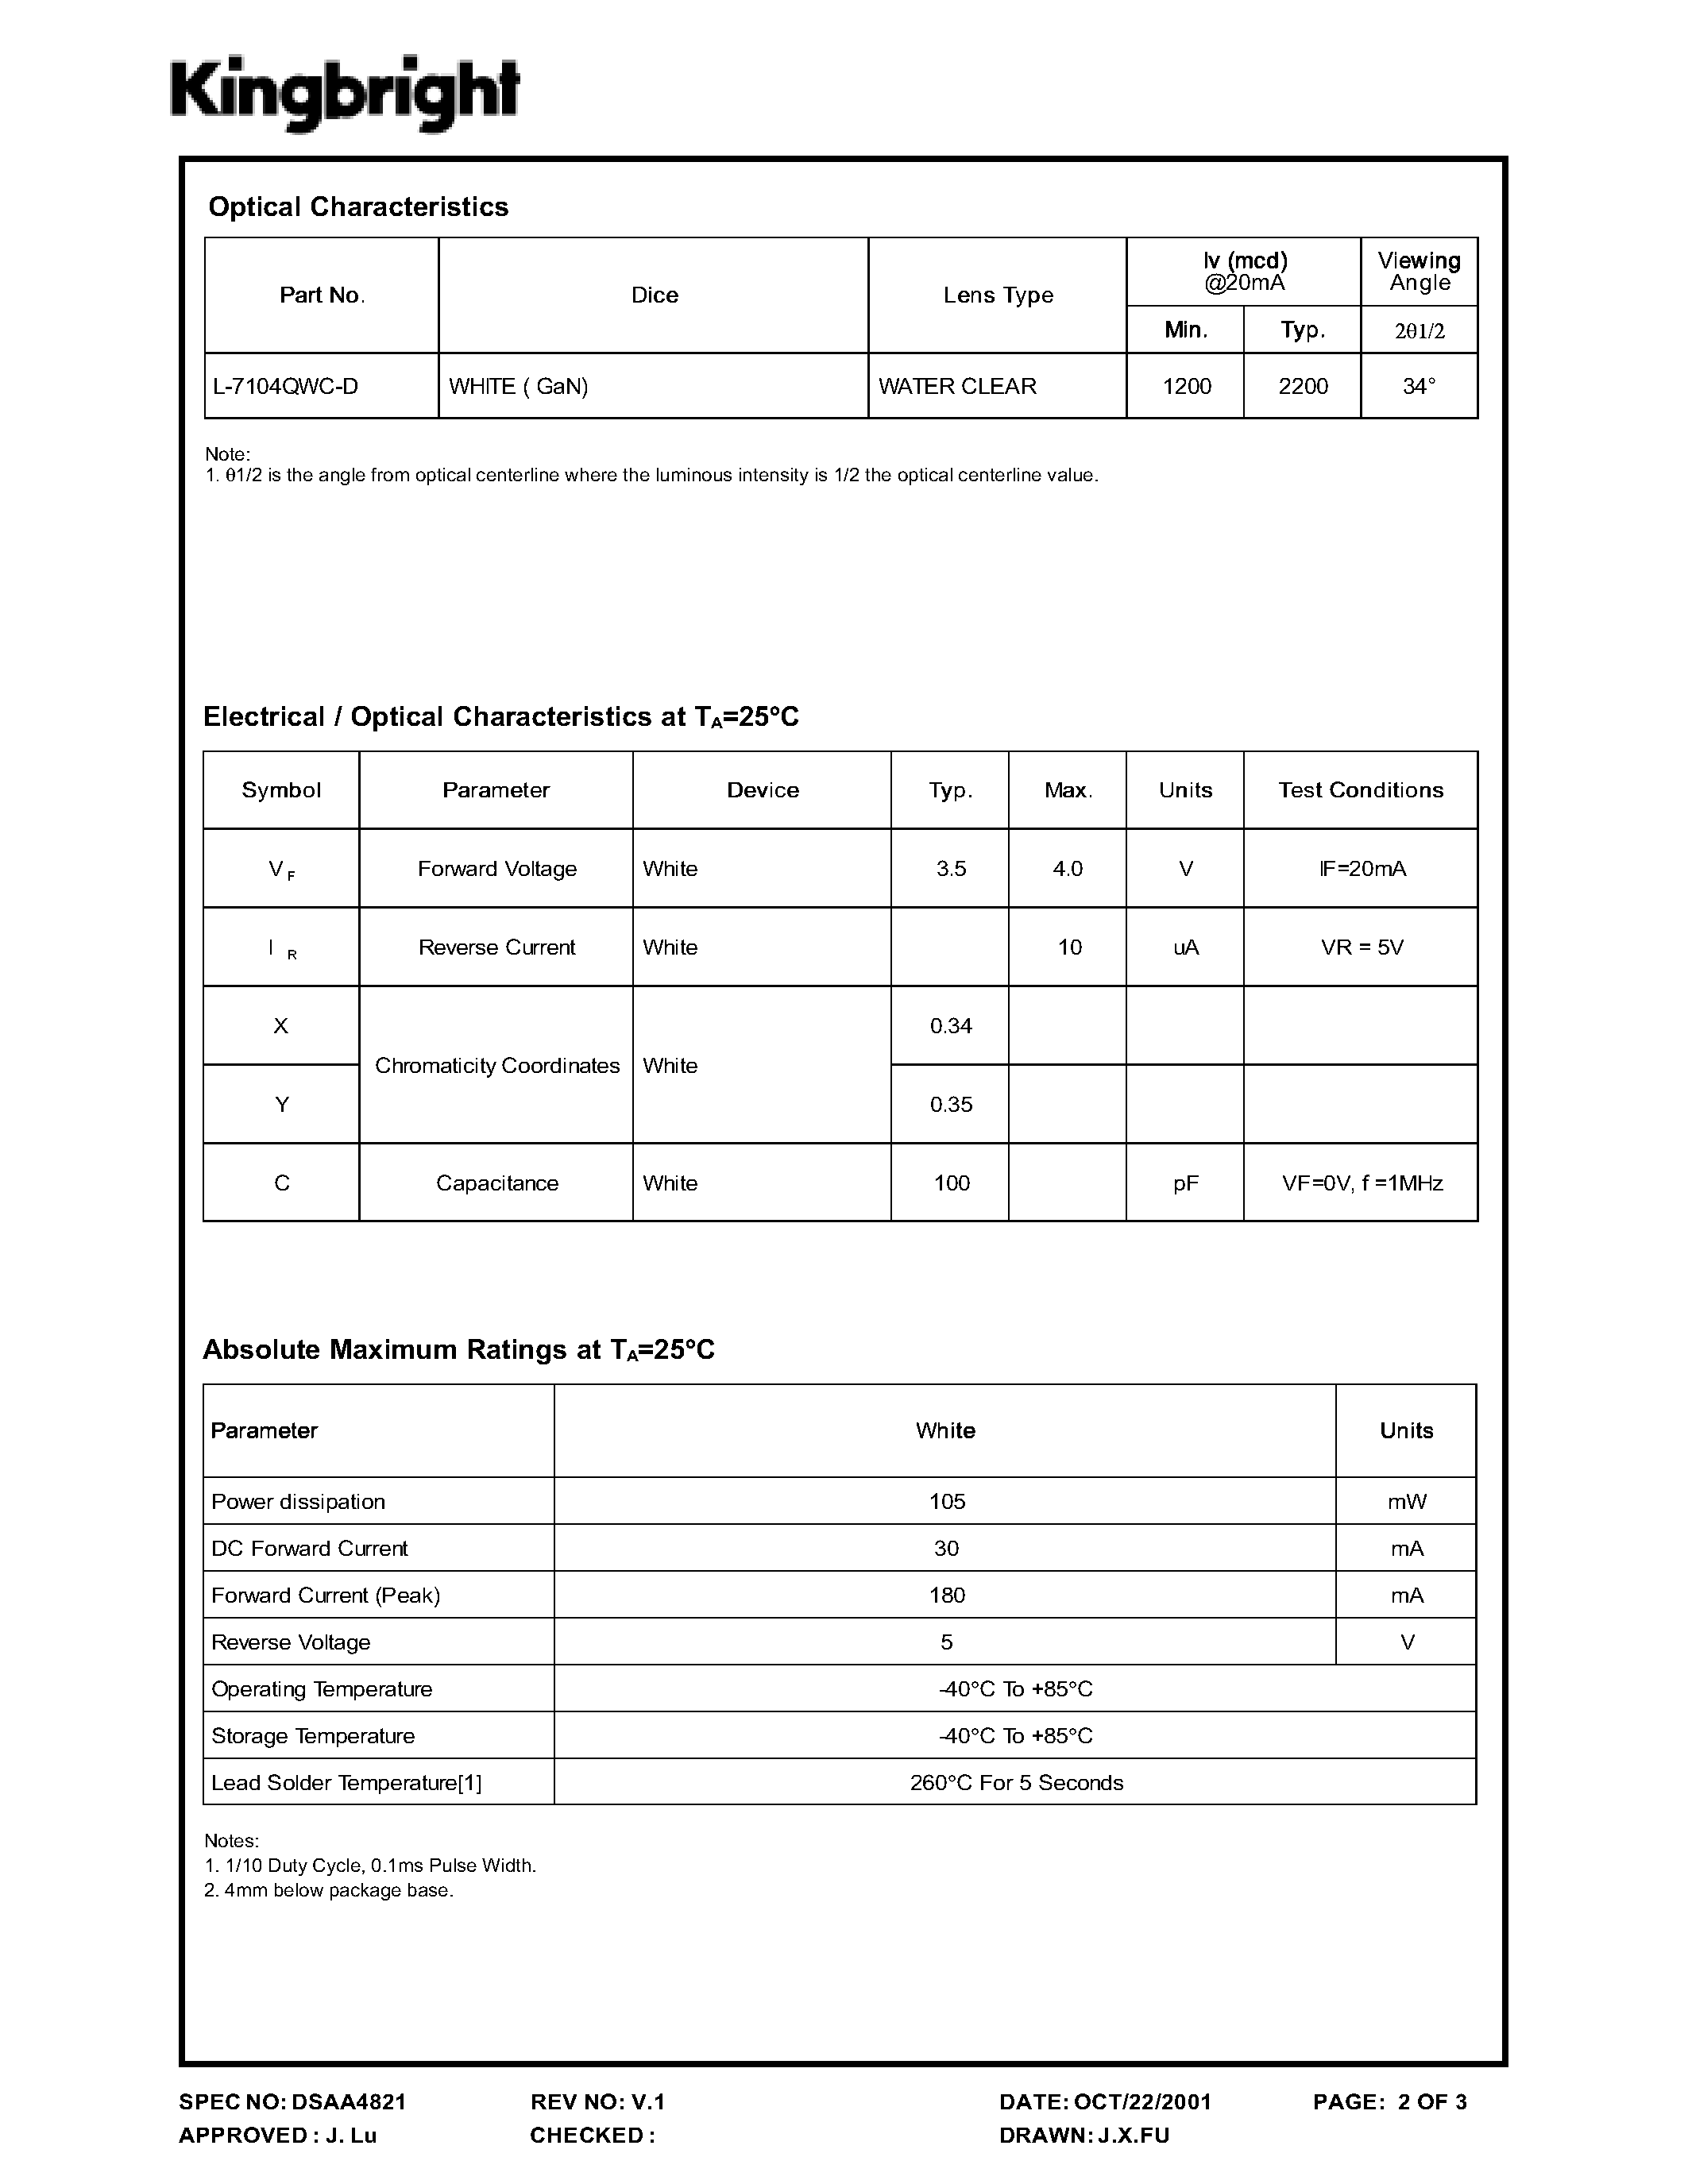 Datasheet L-7104QWC-D - Solid State Lamp page 2